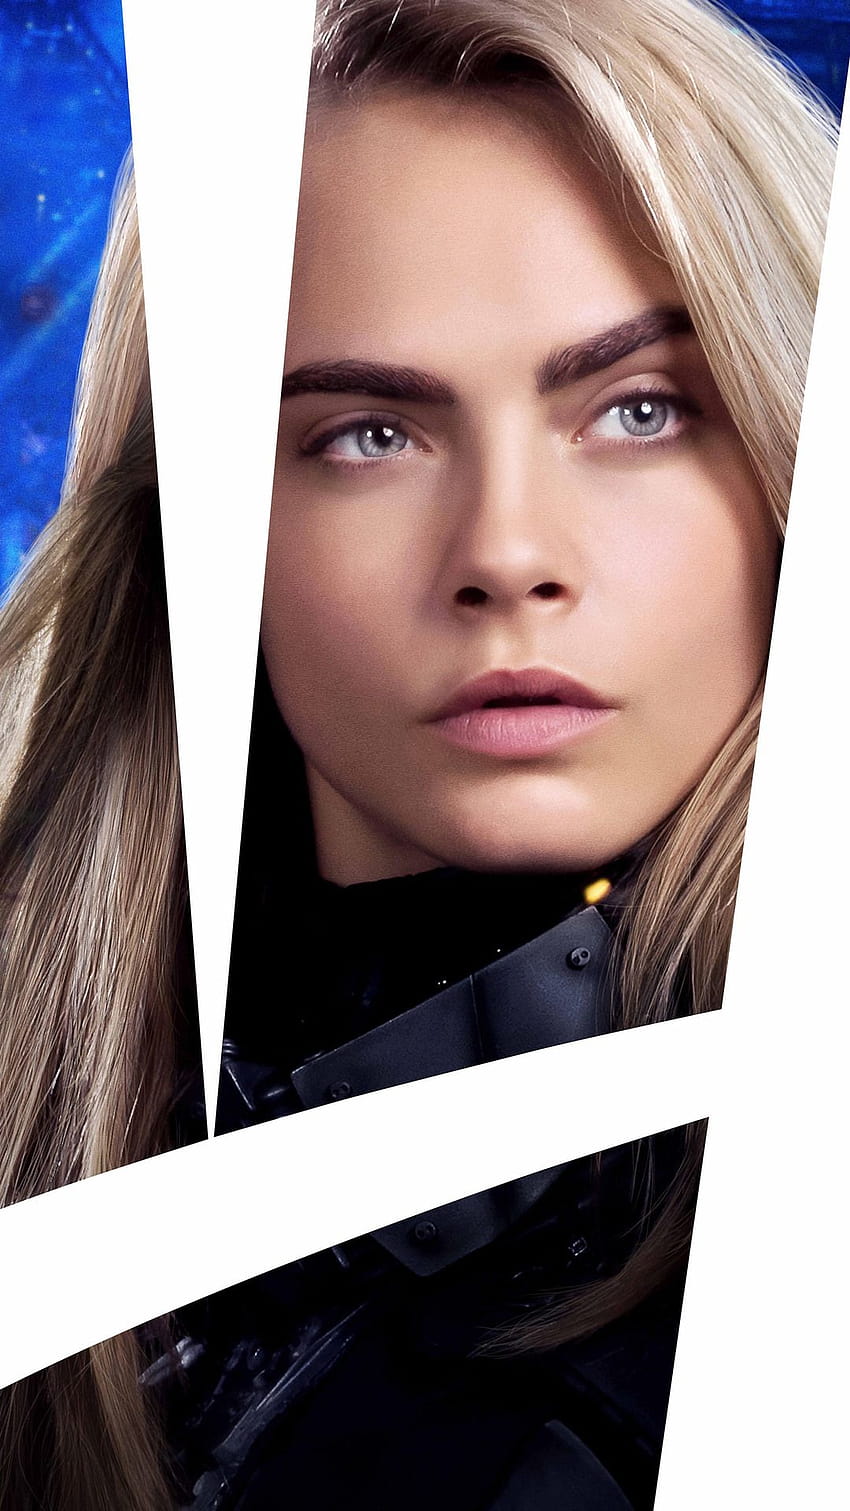 6103312 / 1080x1920 valerian and the city of a thousand planets, 2017 movies, movies, cara delevingne, for Iphone 6, 7, 8, valerian and the city of a thousand planets iphone HD phone wallpaper